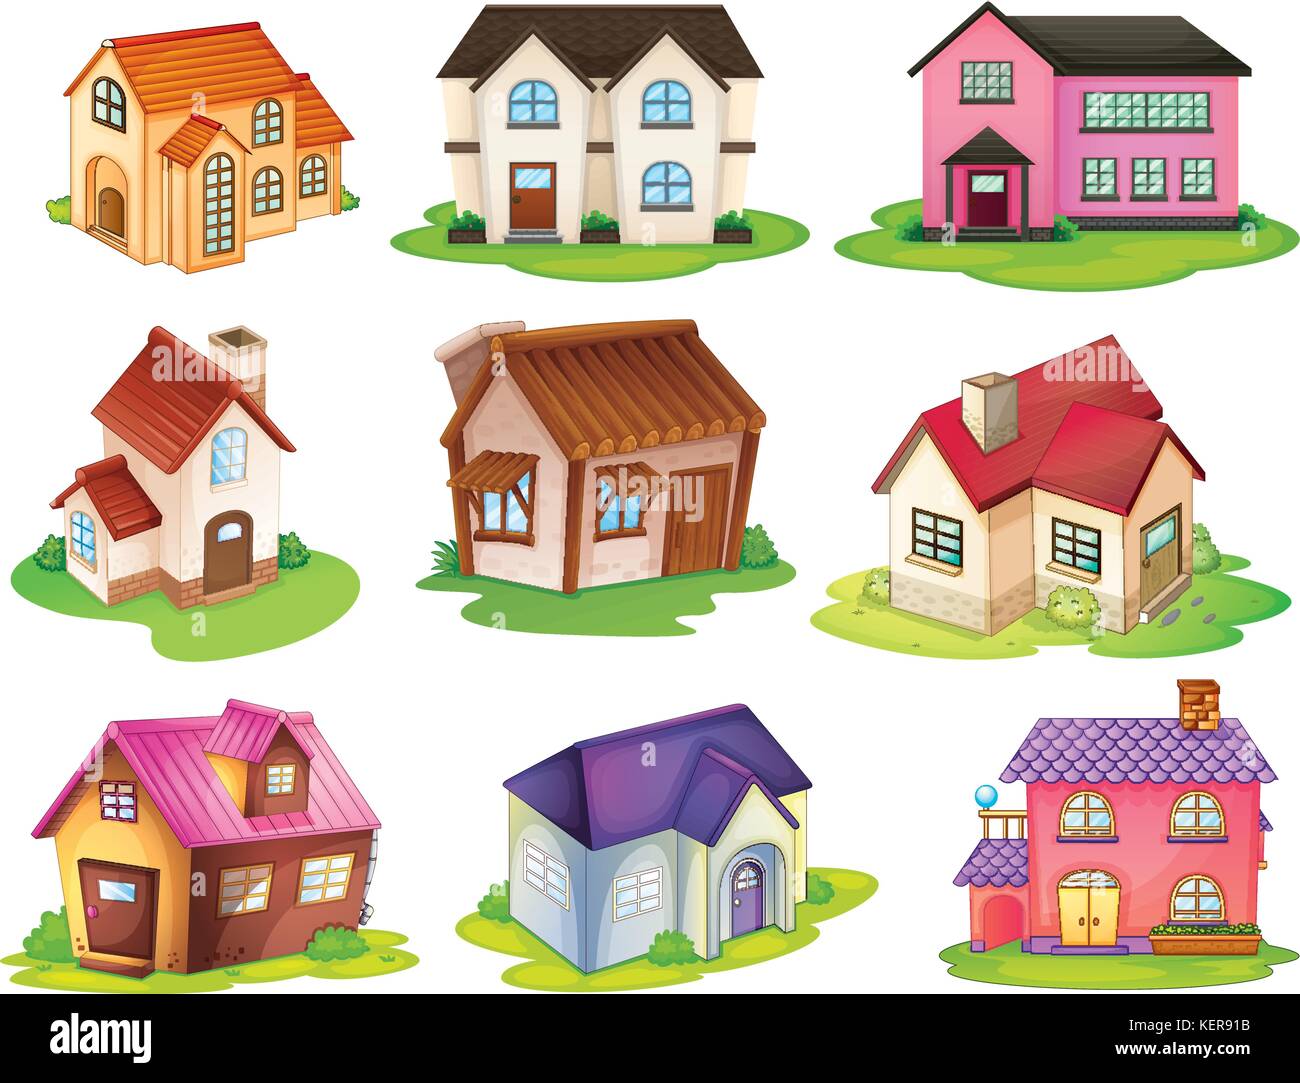 Illustration of the different houses on a white background Stock Vector